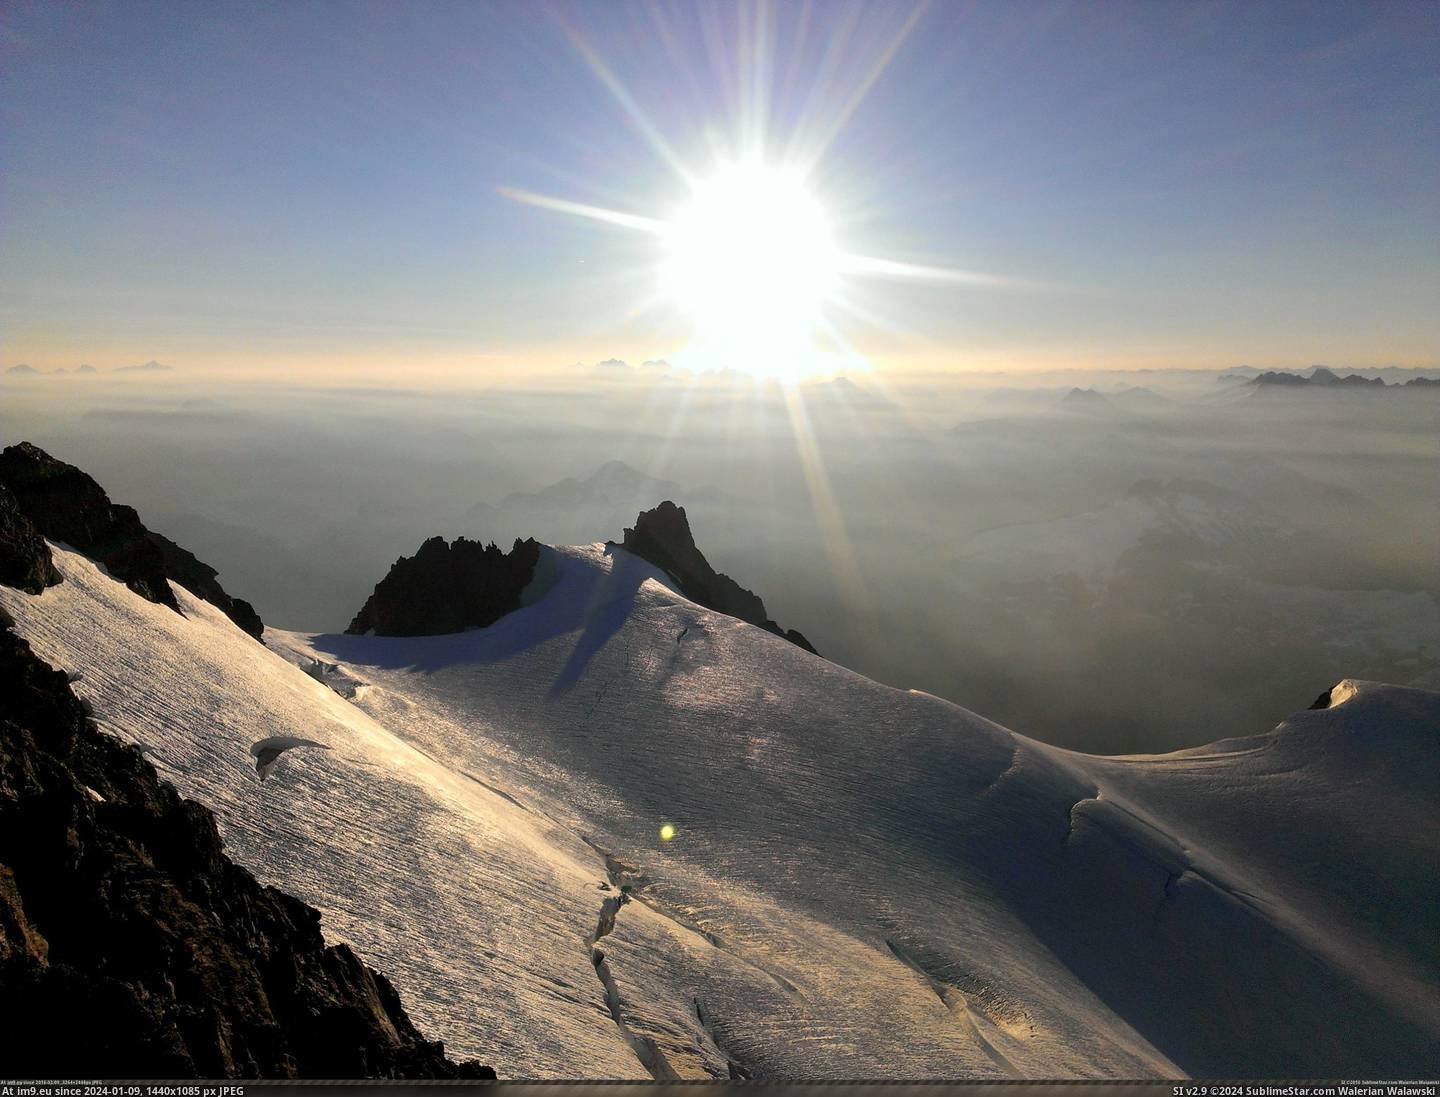 [Earthporn] View from Mt. Shuksan summit block, July 2015 [3264x2448] (in My r/EARTHPORN favs)